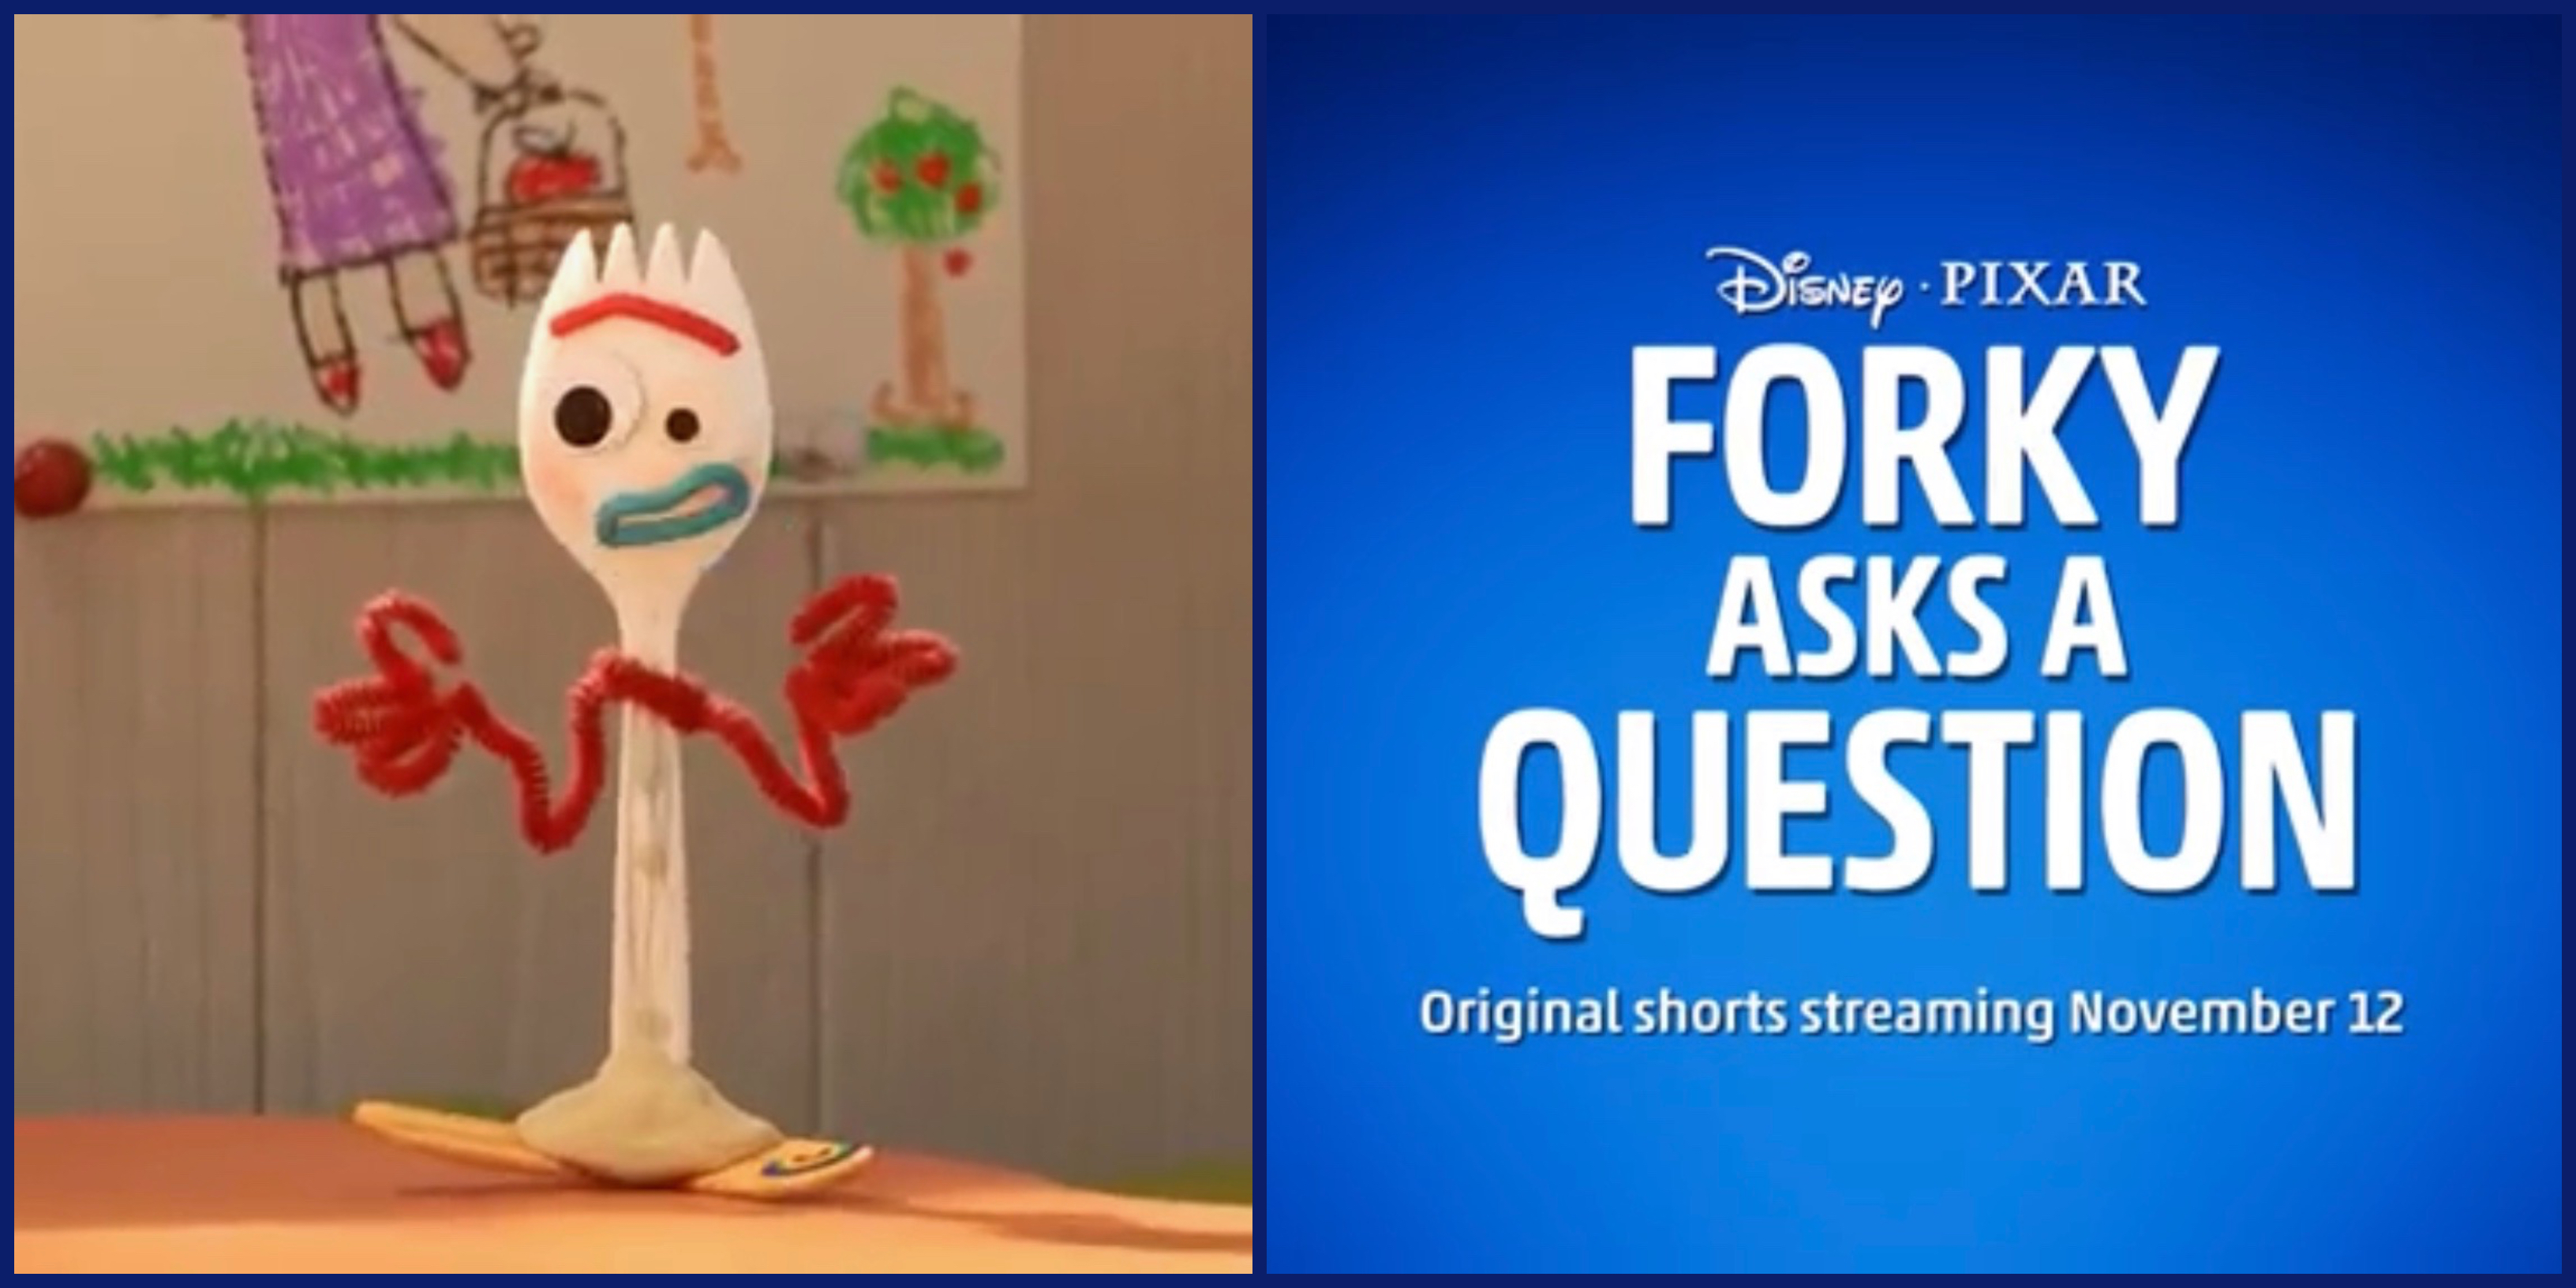 New Trailer Released for “Forky Asks A Question” Coming to Disney+